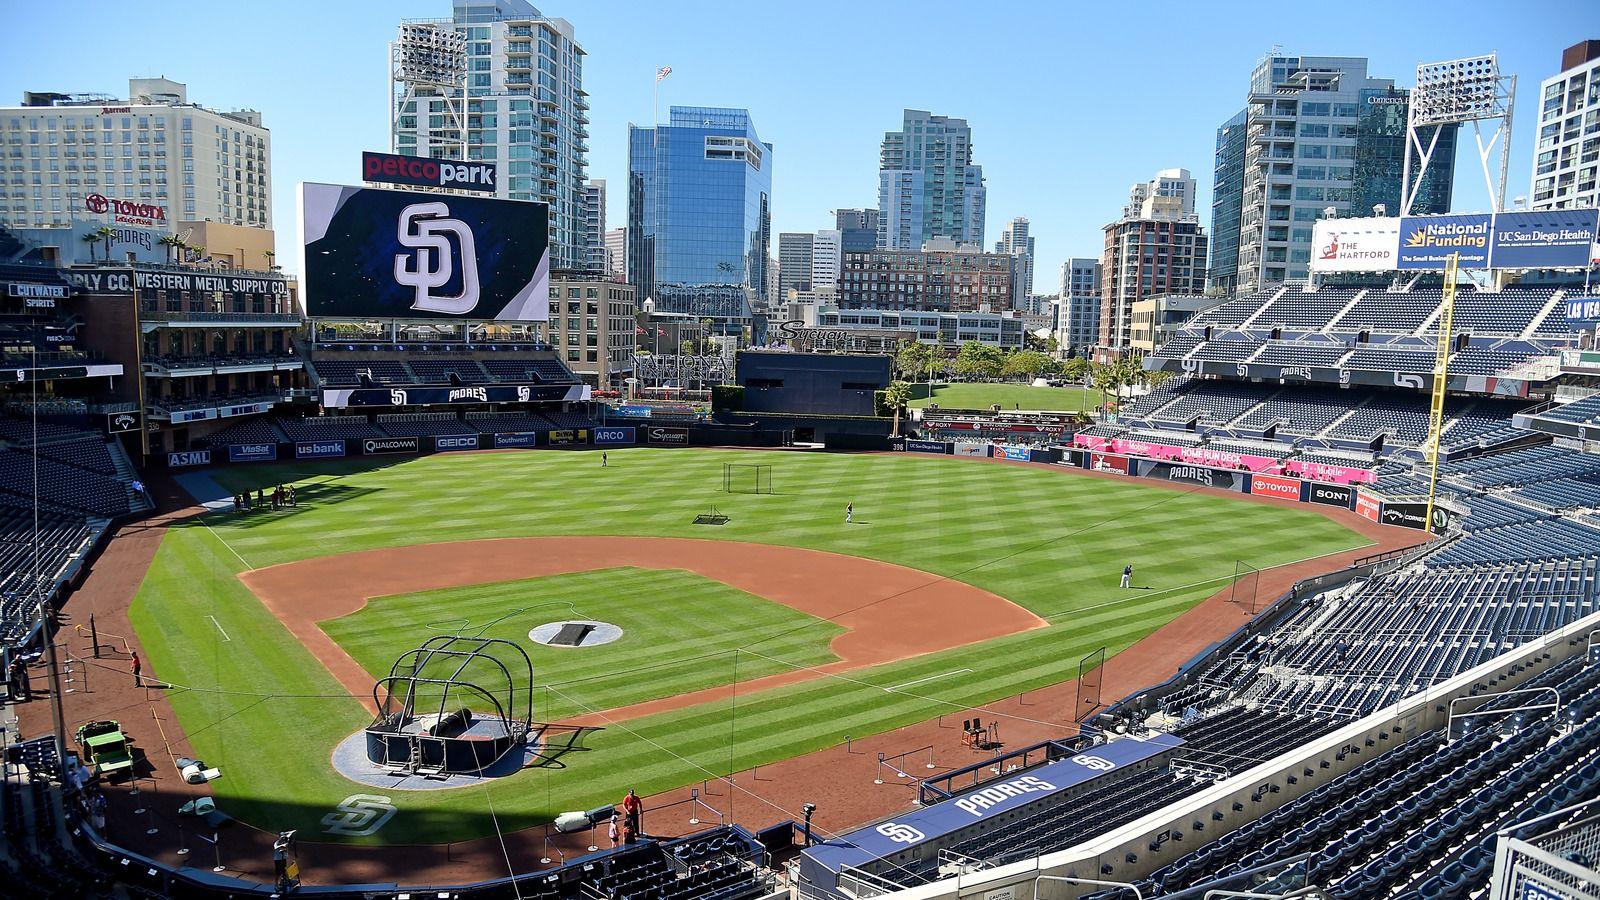 The Farm in Southern California: The San Diego Padres City